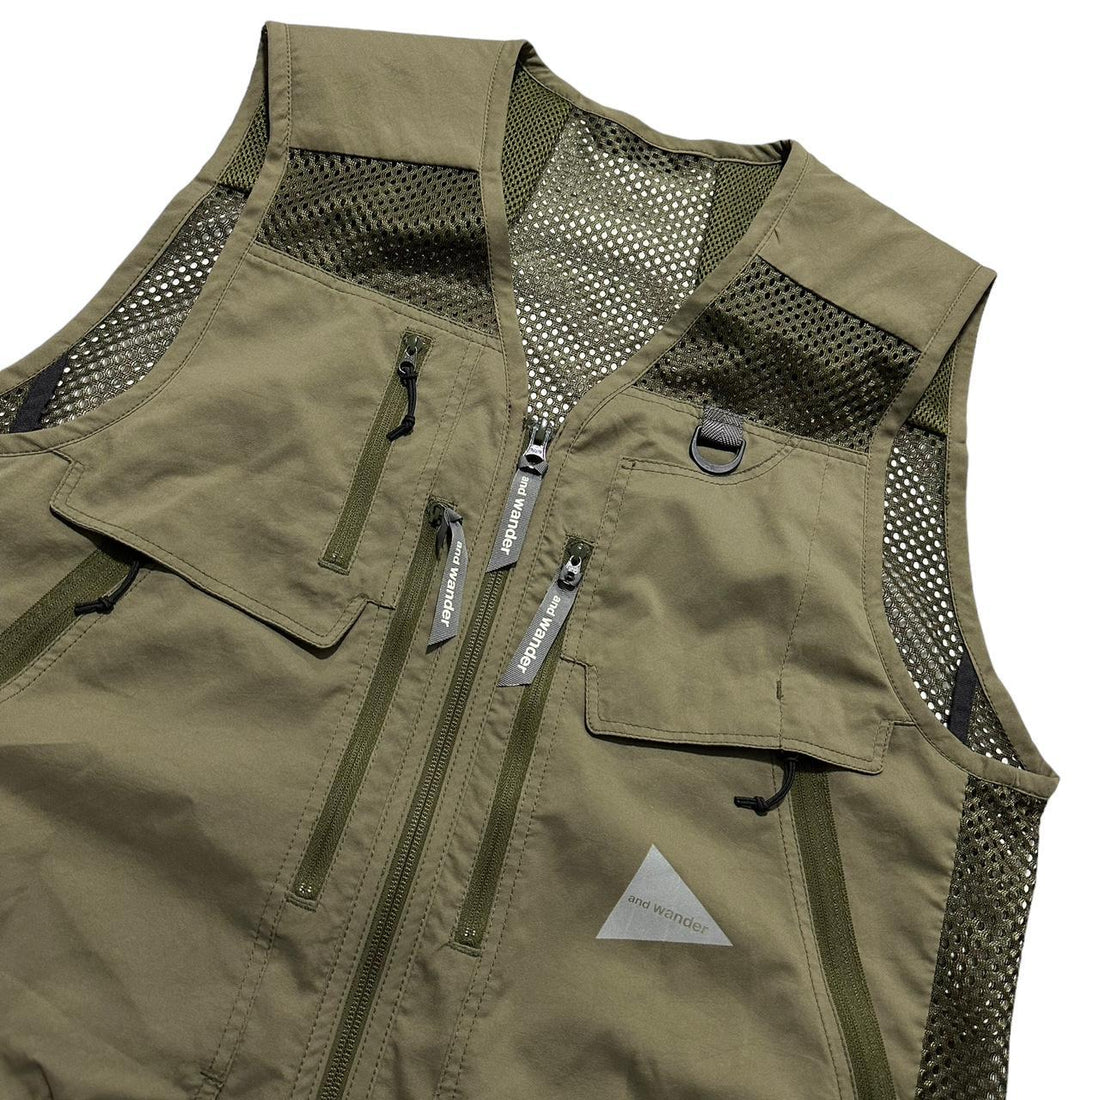 And Wander Tactical Vest